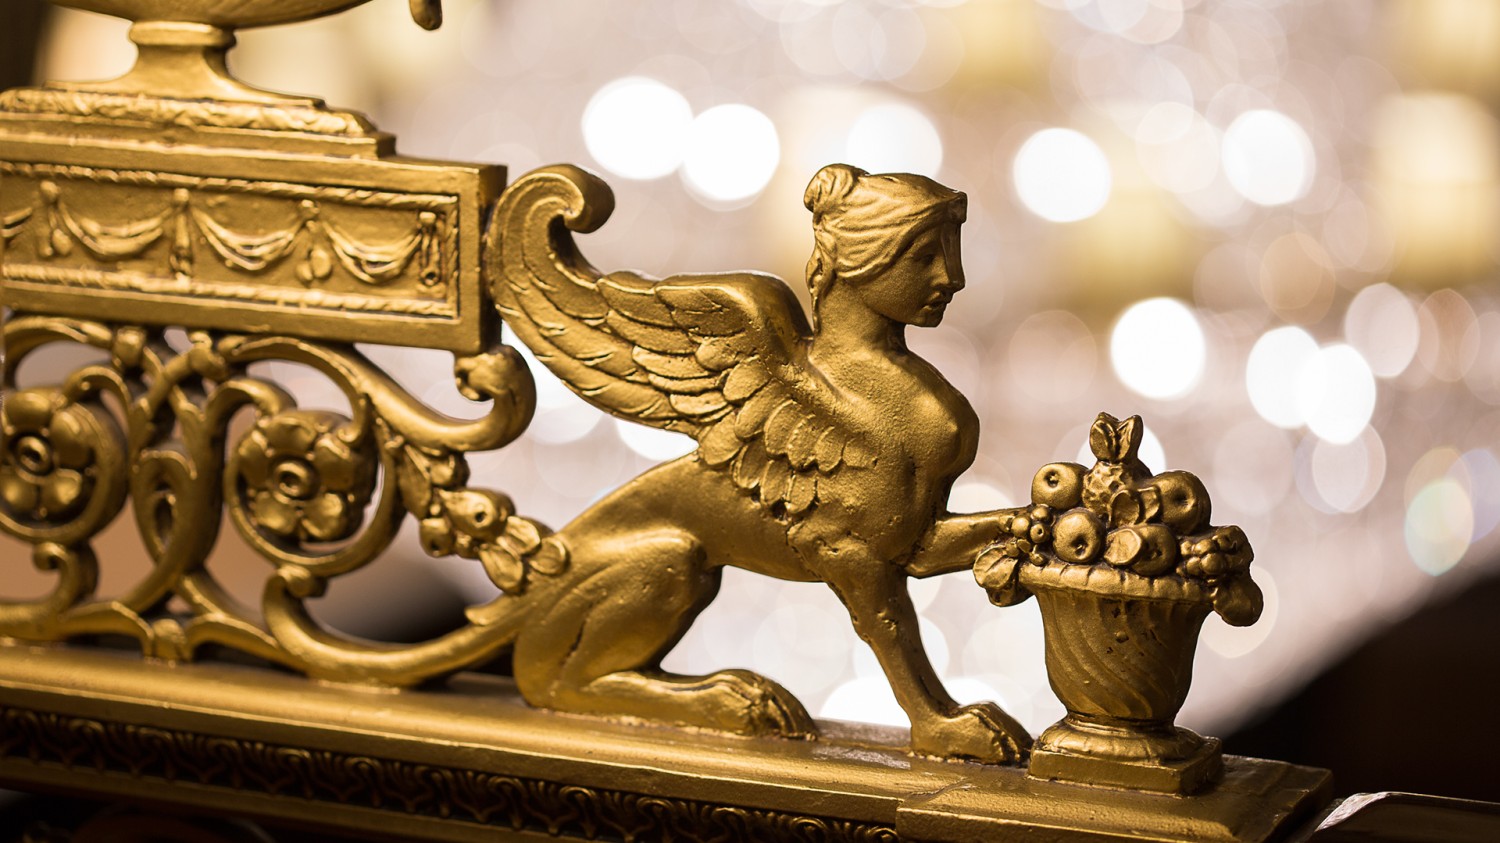 Amway Grand_Pantlind Lobby_Close Up of Fixture_Historic Lion Woman_Fruit Basket_Railing